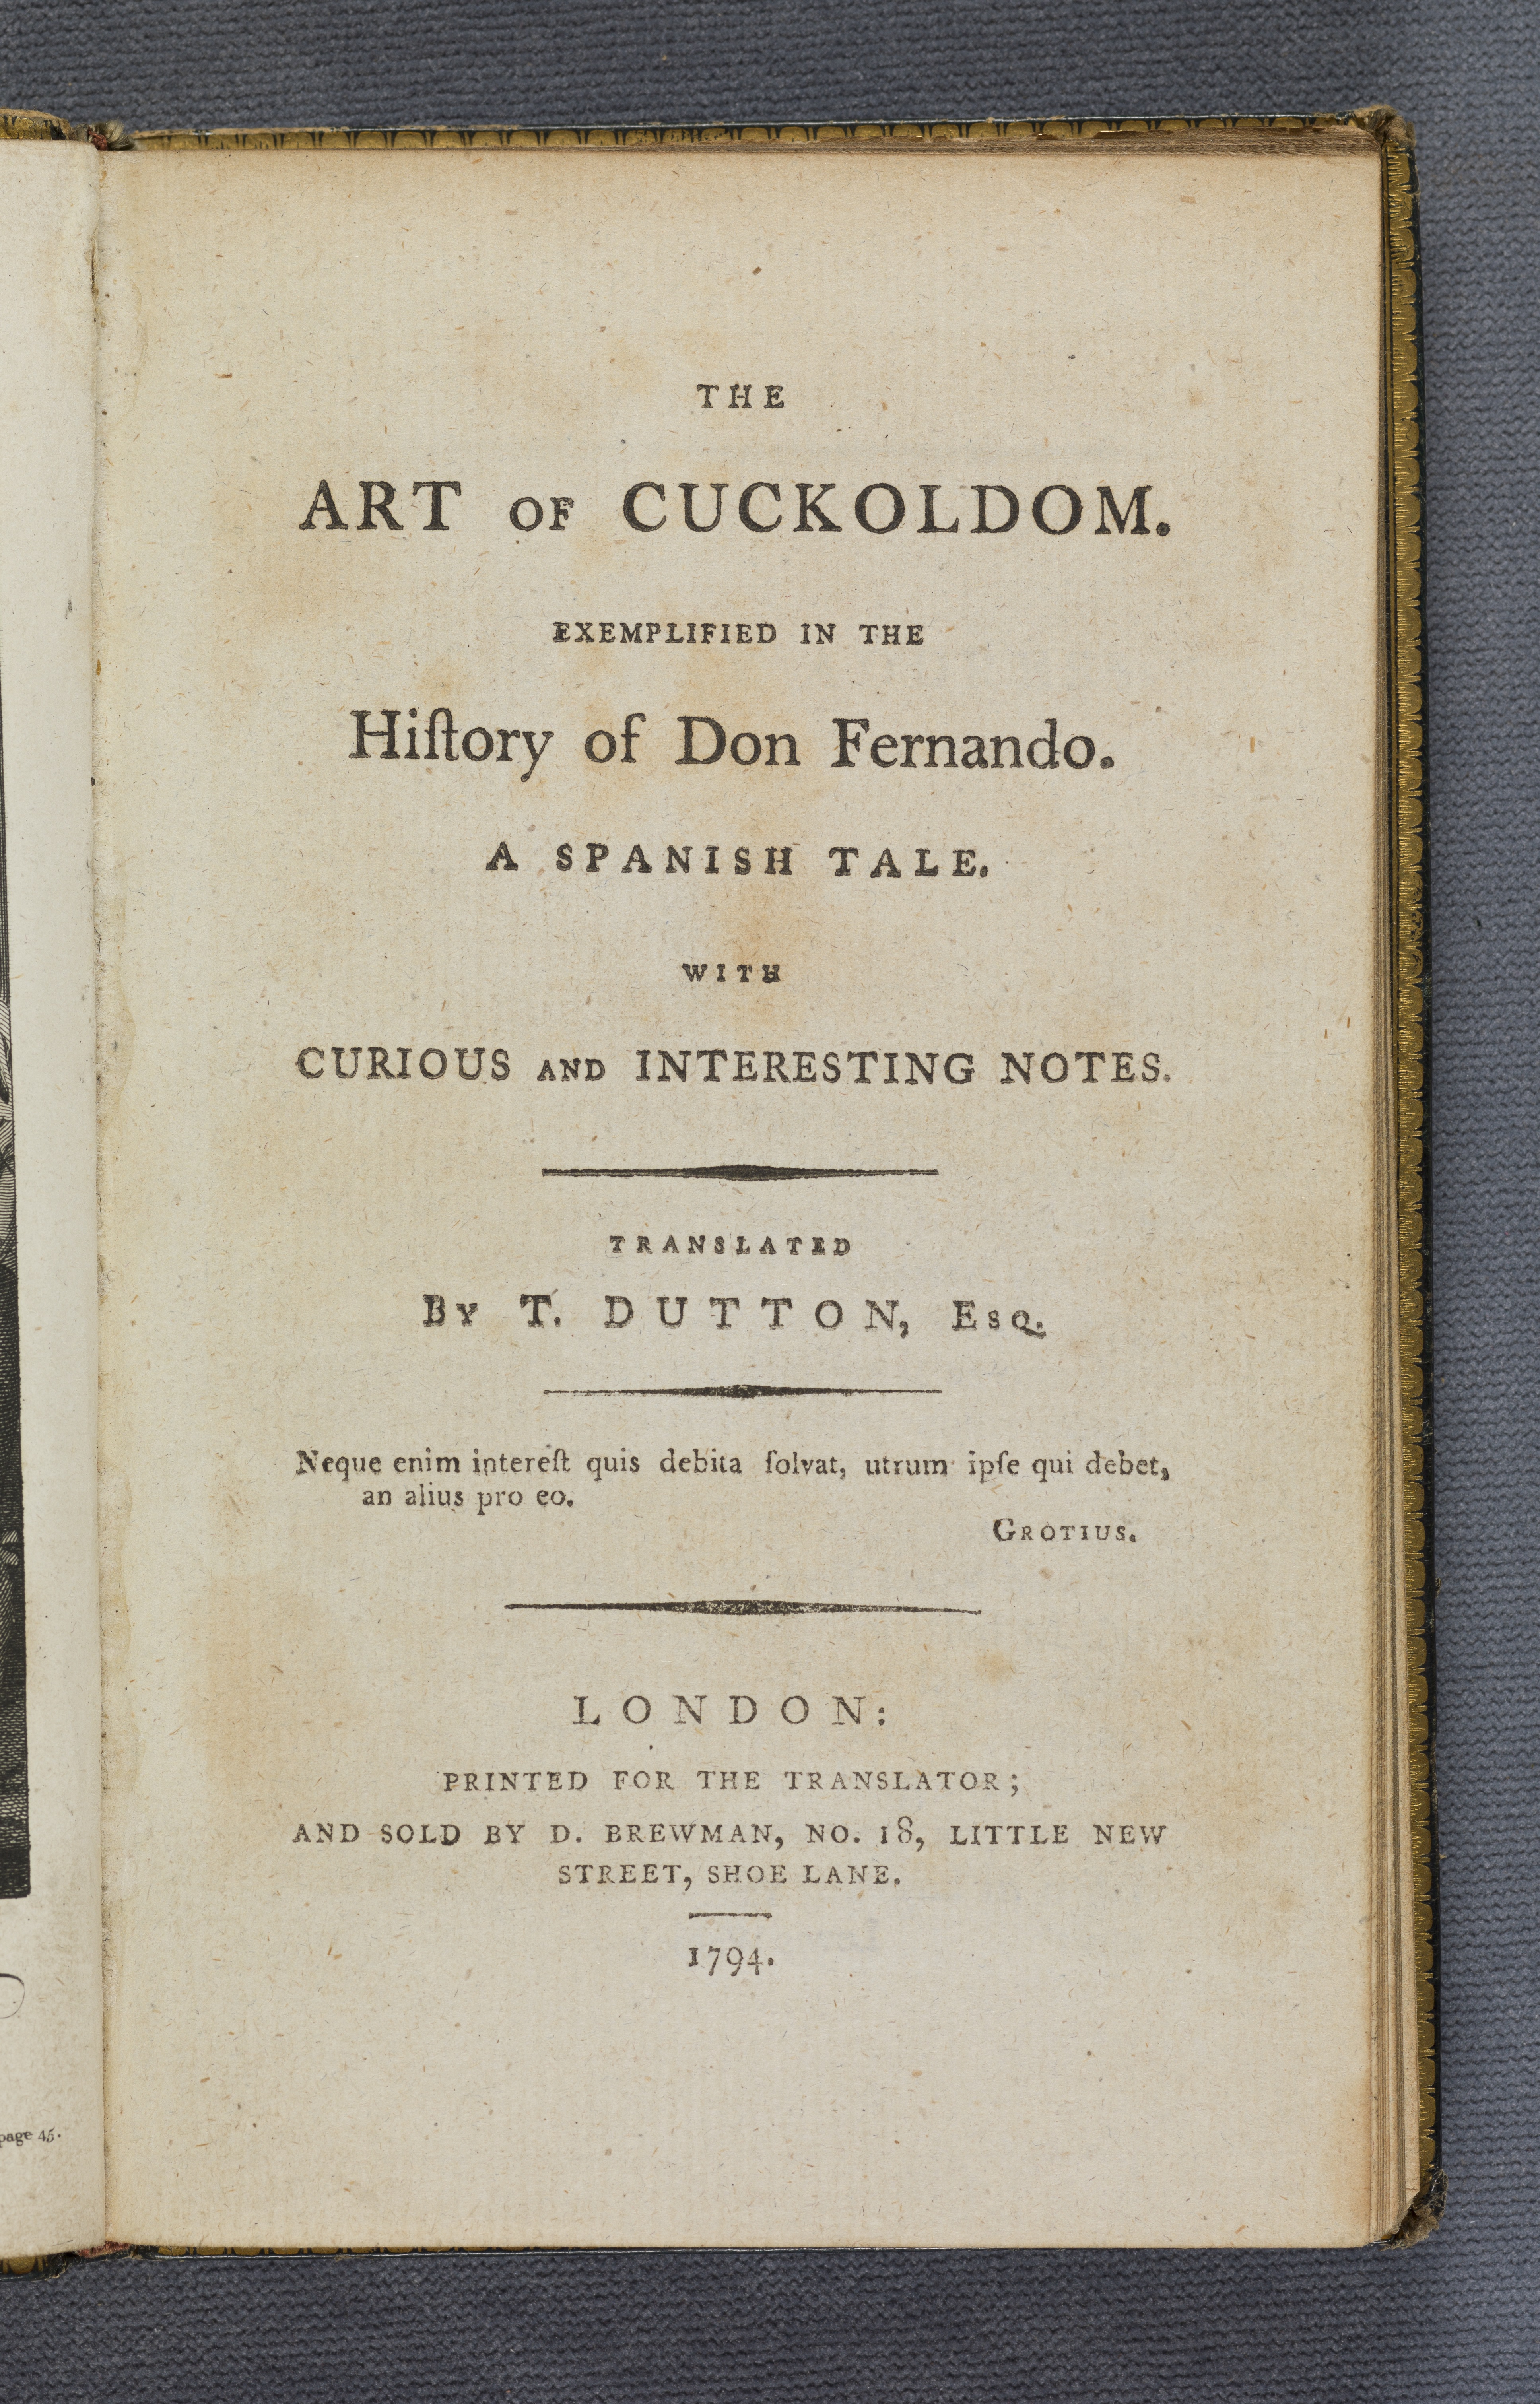 The art of cuckoldom title page